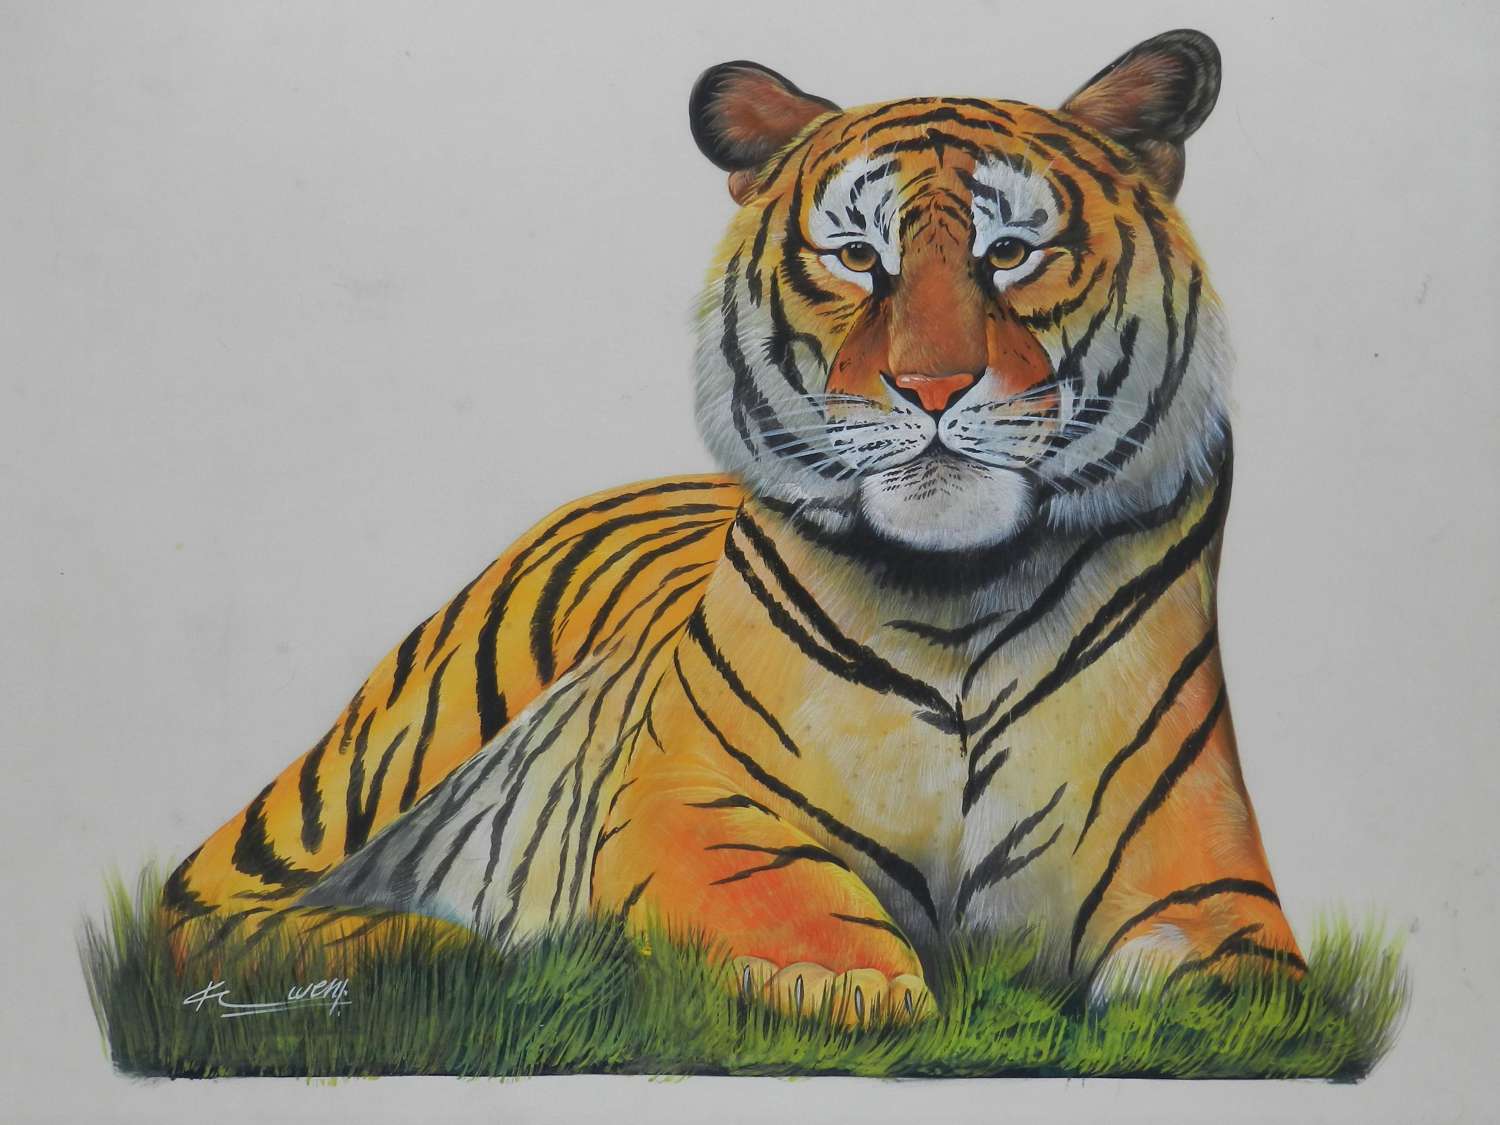 Tiger Watercolor Painting Signed by Artist 20th Century Asian